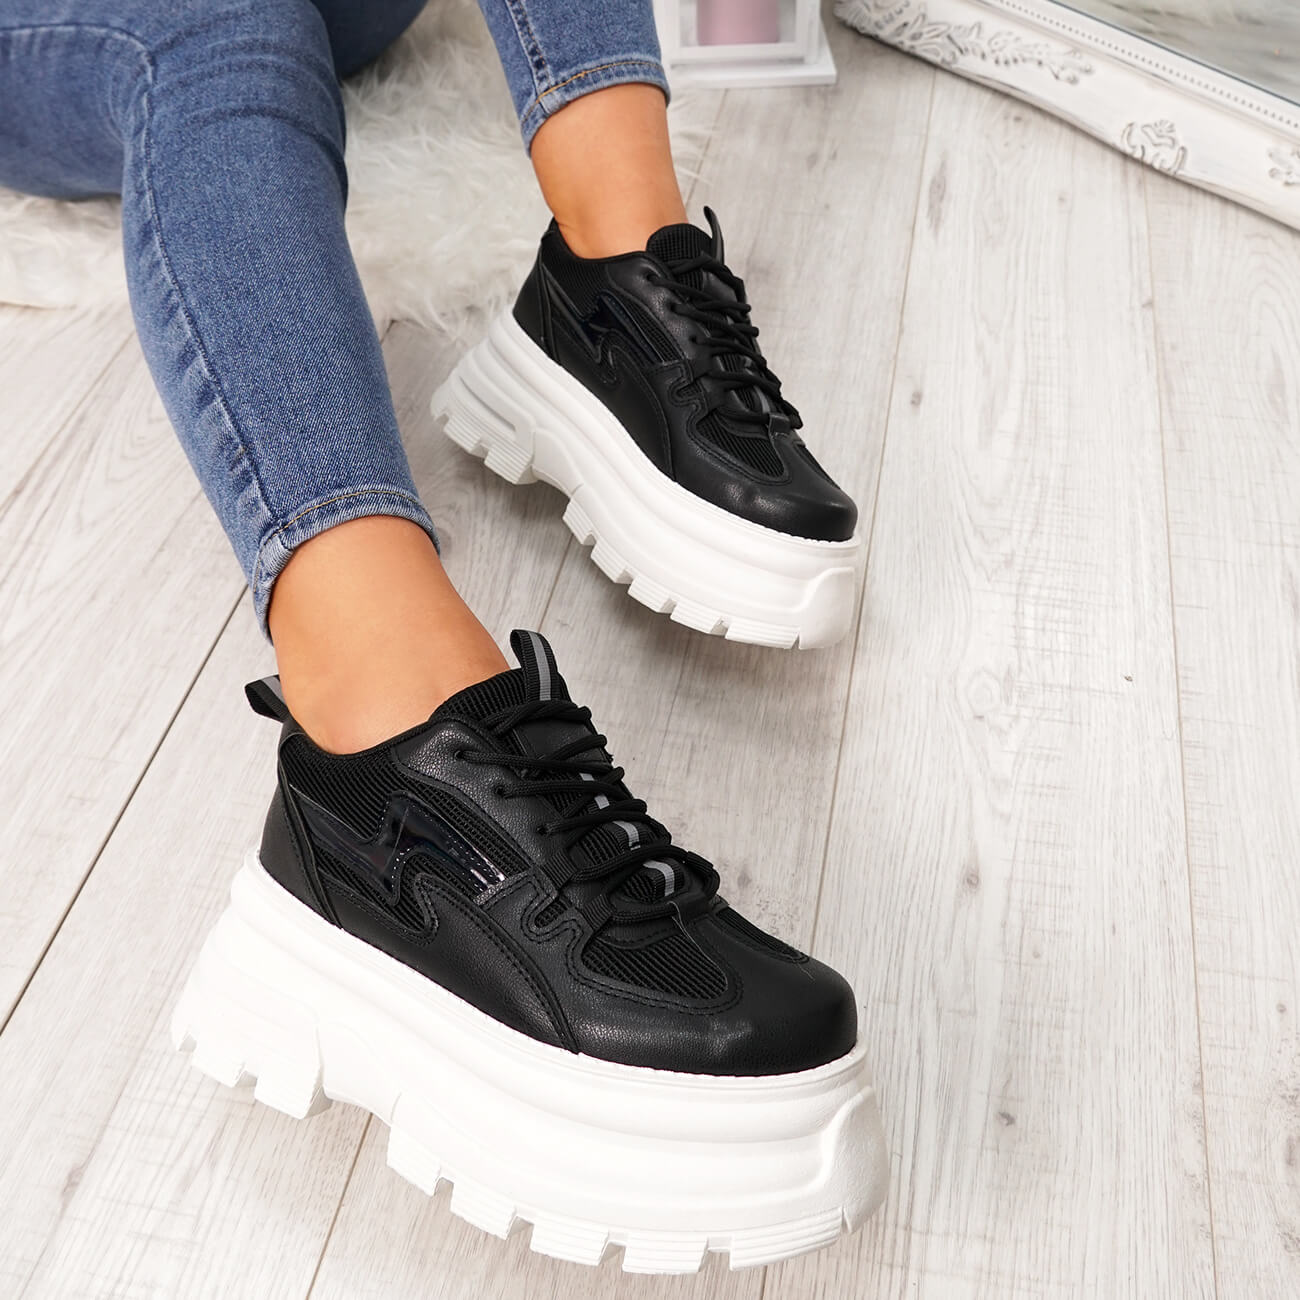 WOMENS LADIES PLATFORM CHUNKY TRAINERS LACE UP SPORTS GYM